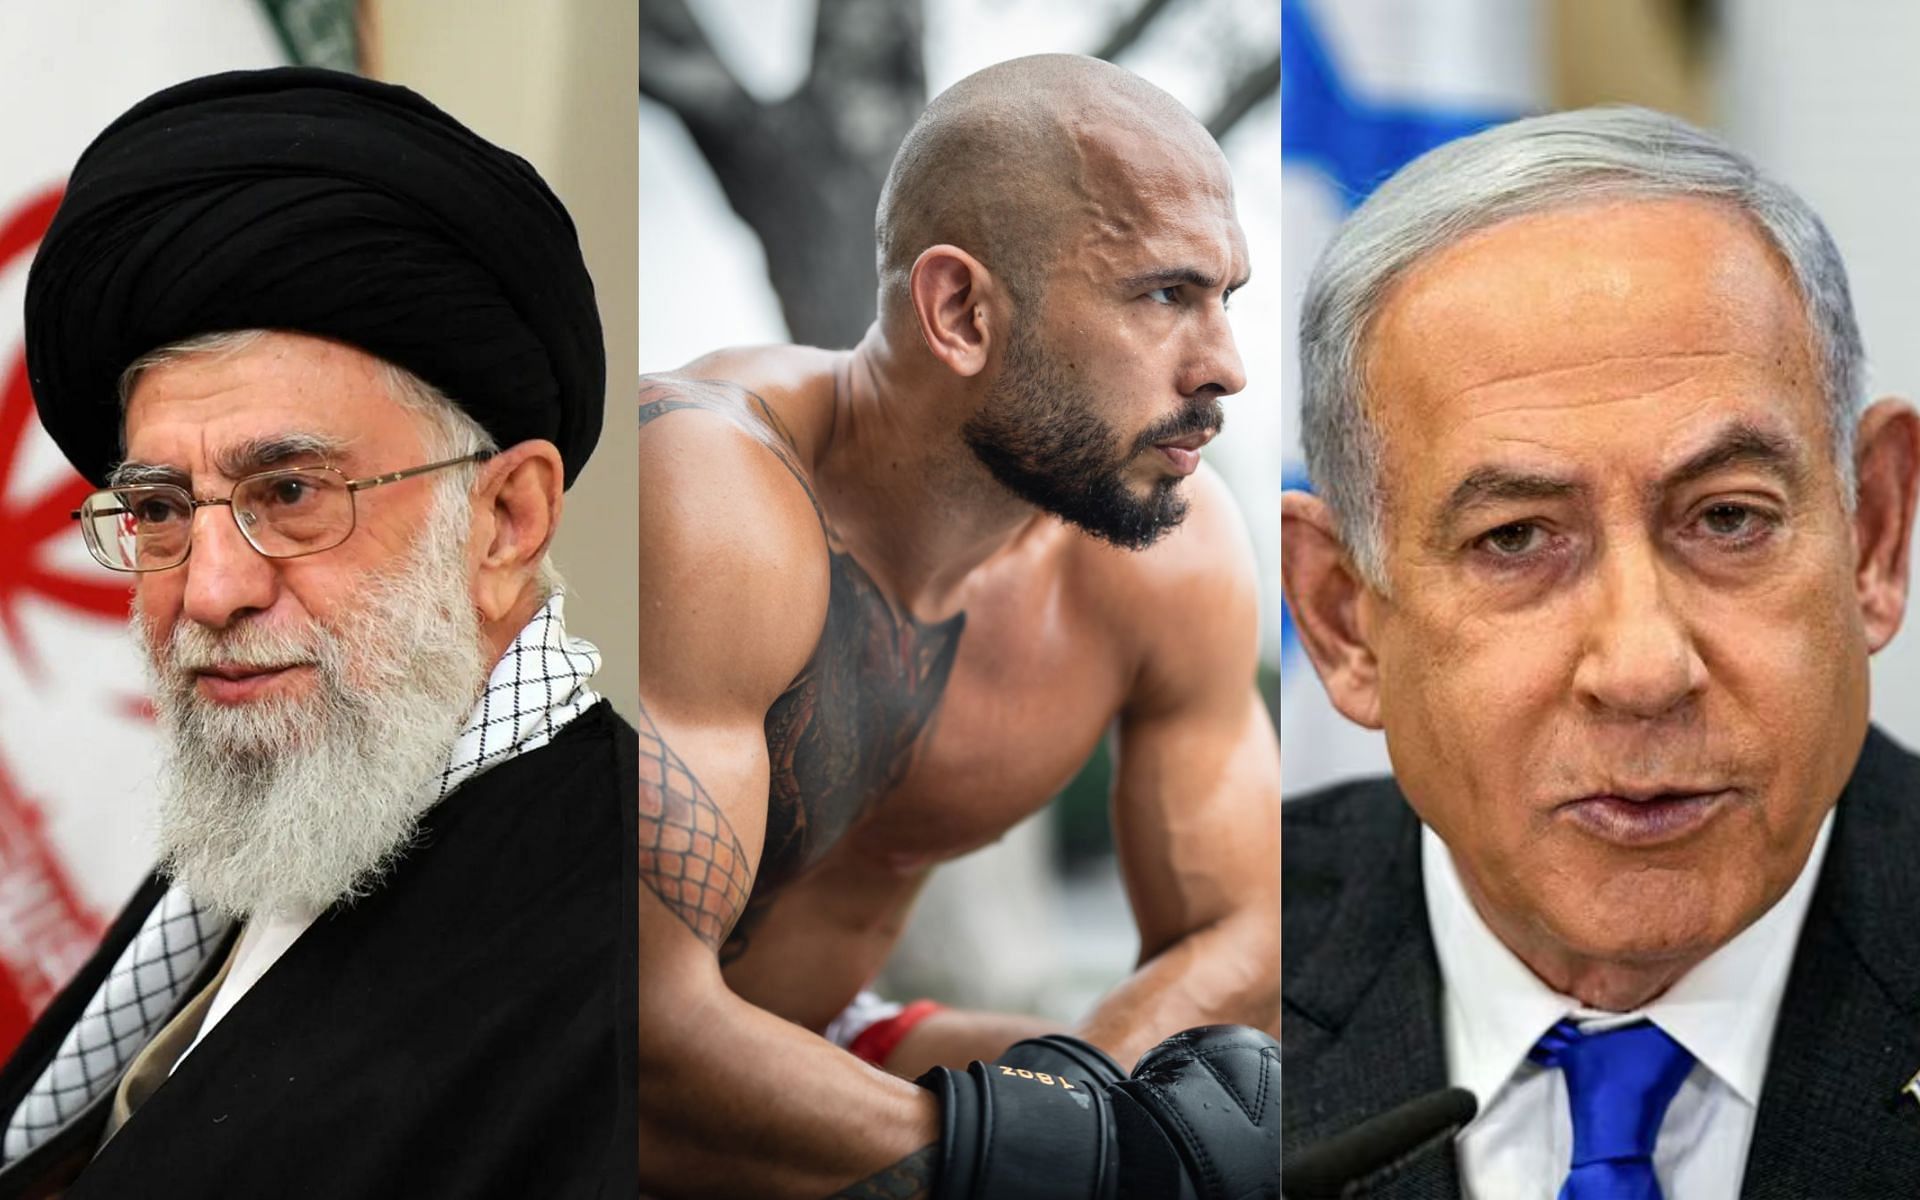 Andrew Tate (center) gives his thoughts on reported tension between Ali Khamenei (left) and Benjamin Netanyahu (right) [Photo Courtesy @cobratate on X and Getty Images]